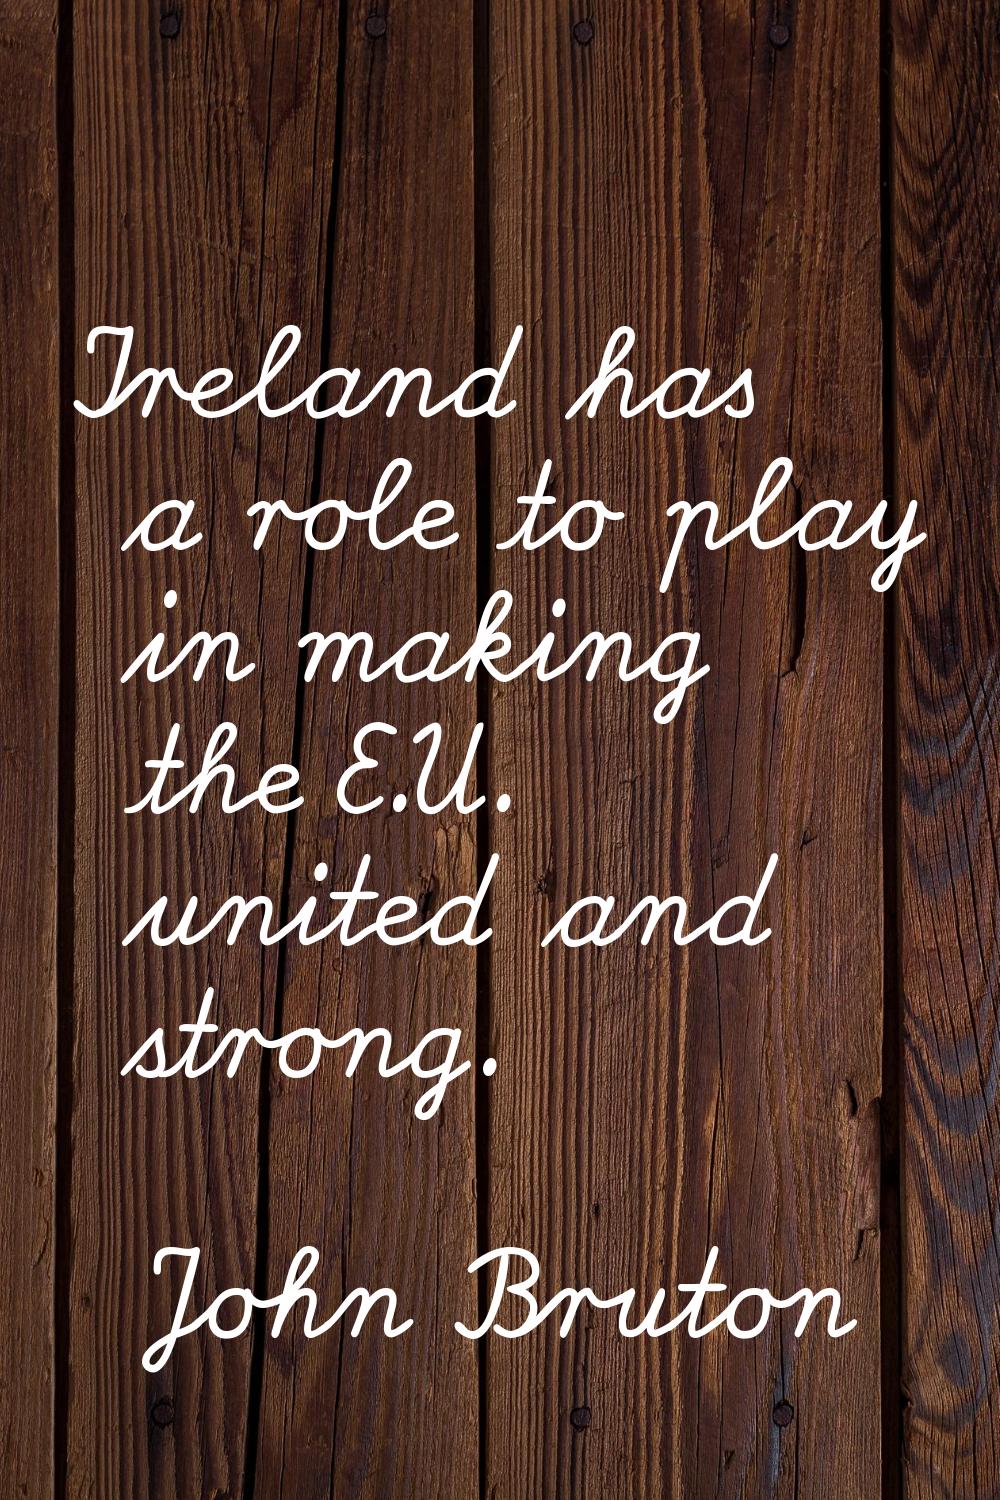 Ireland has a role to play in making the E.U. united and strong.